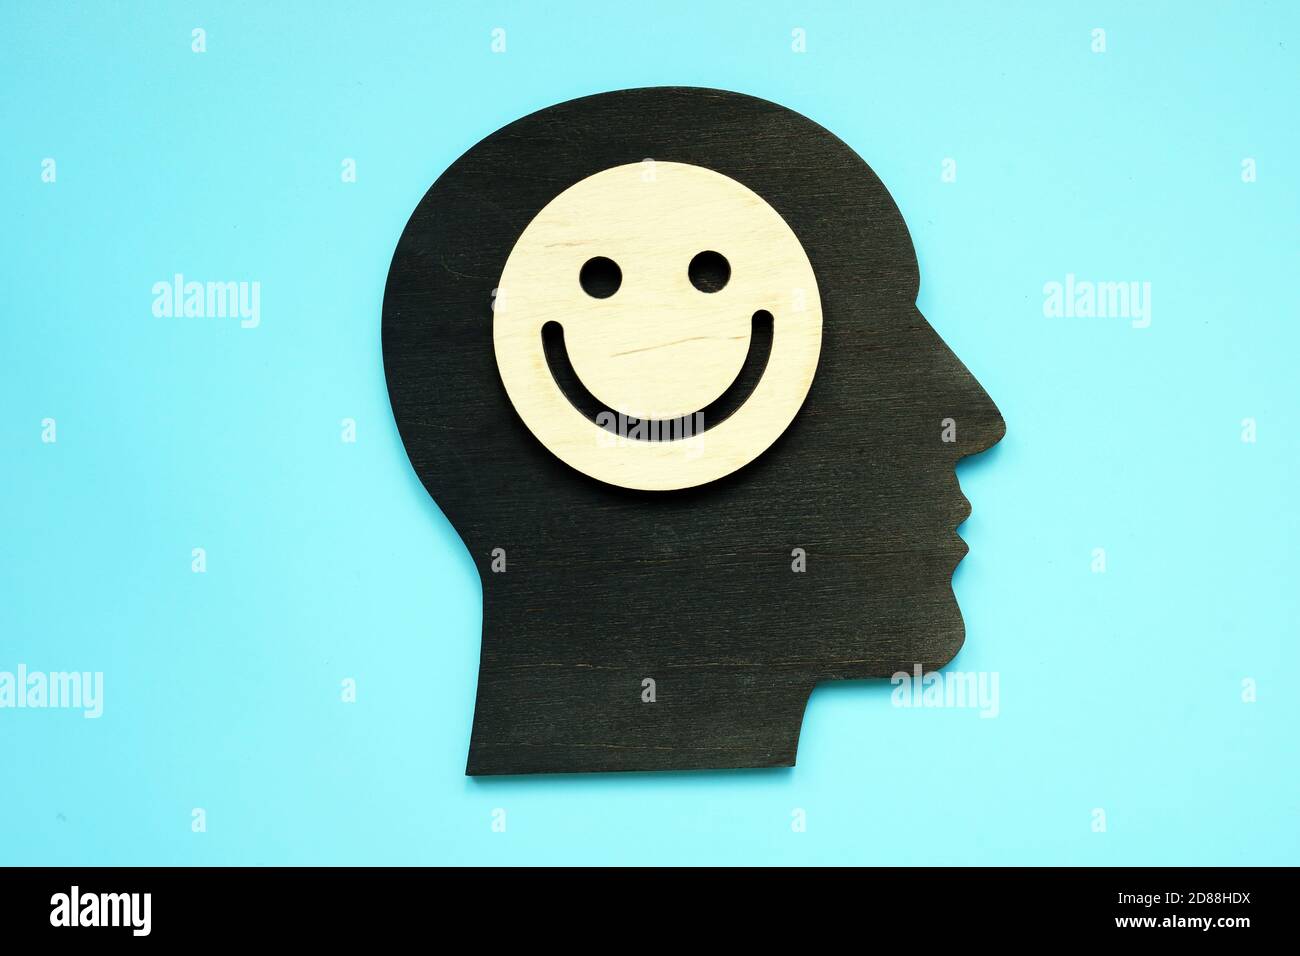 Positive thinking concept. Head shape and smiley face on it. Stock Photo